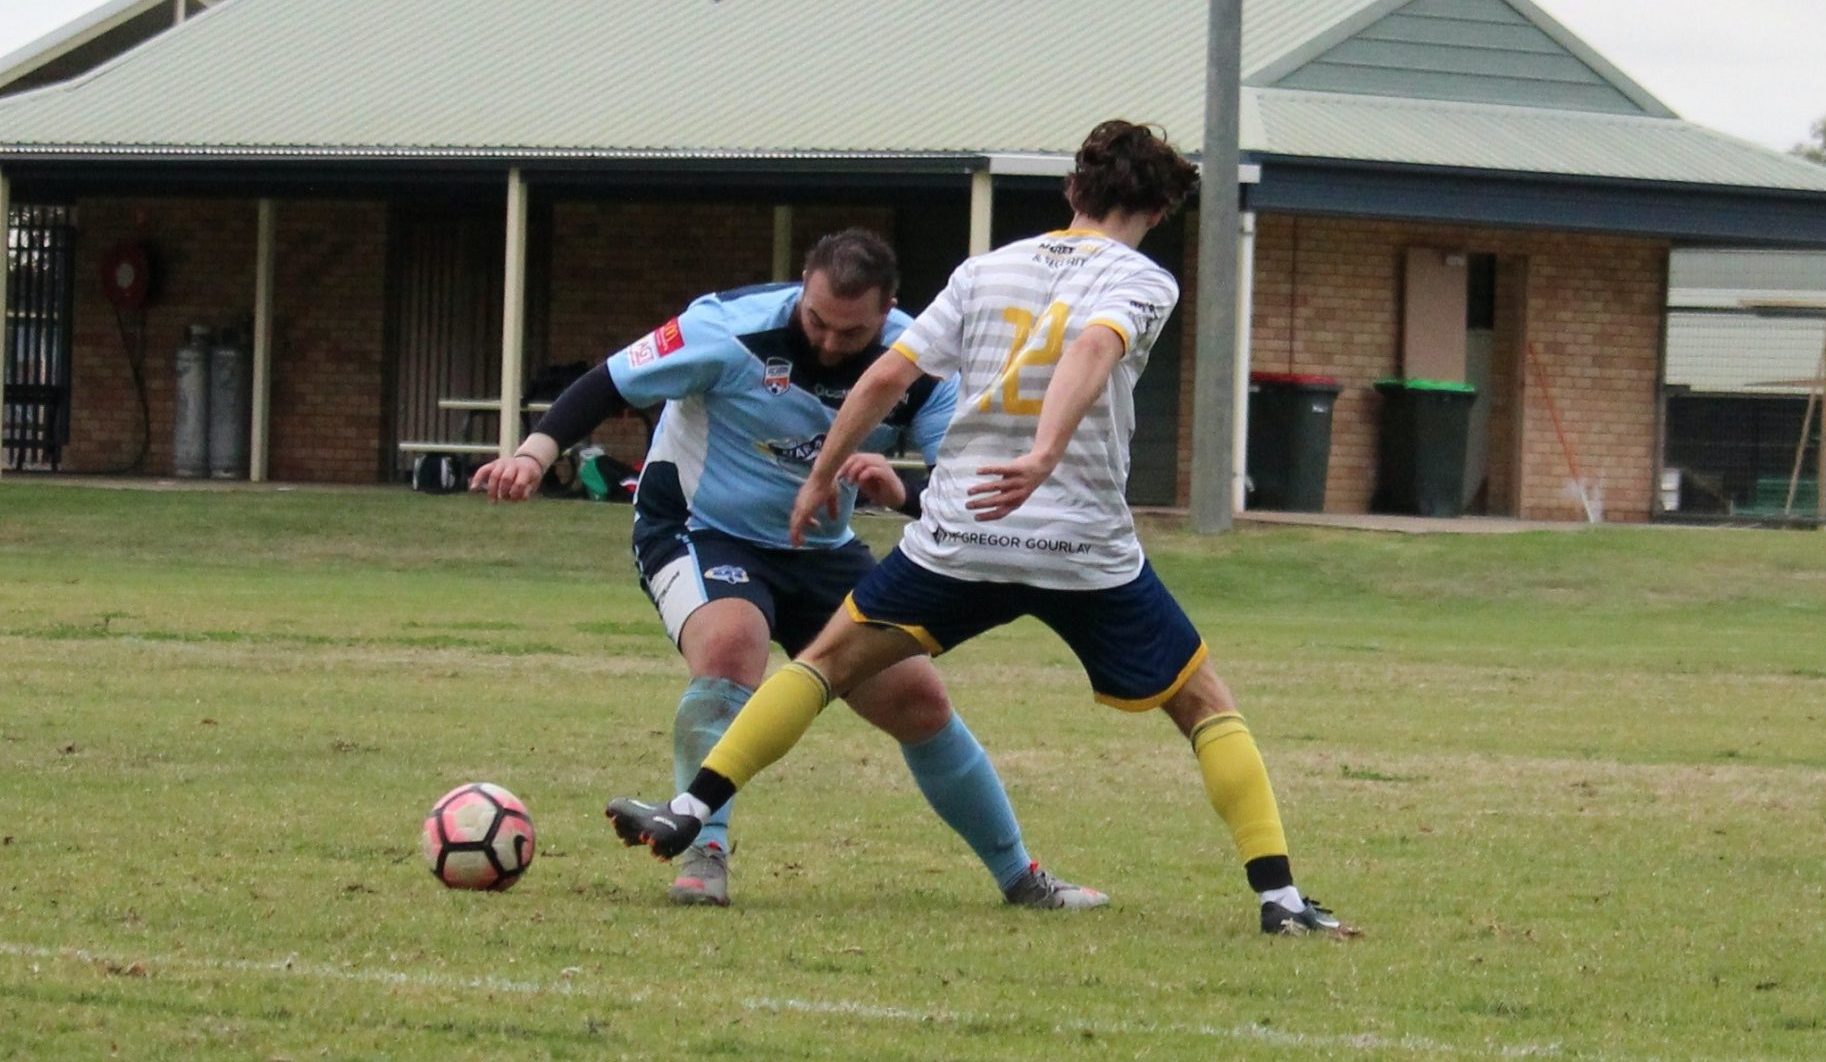 Narrabri Sporties FC goes nine points clear with a big win in Moree